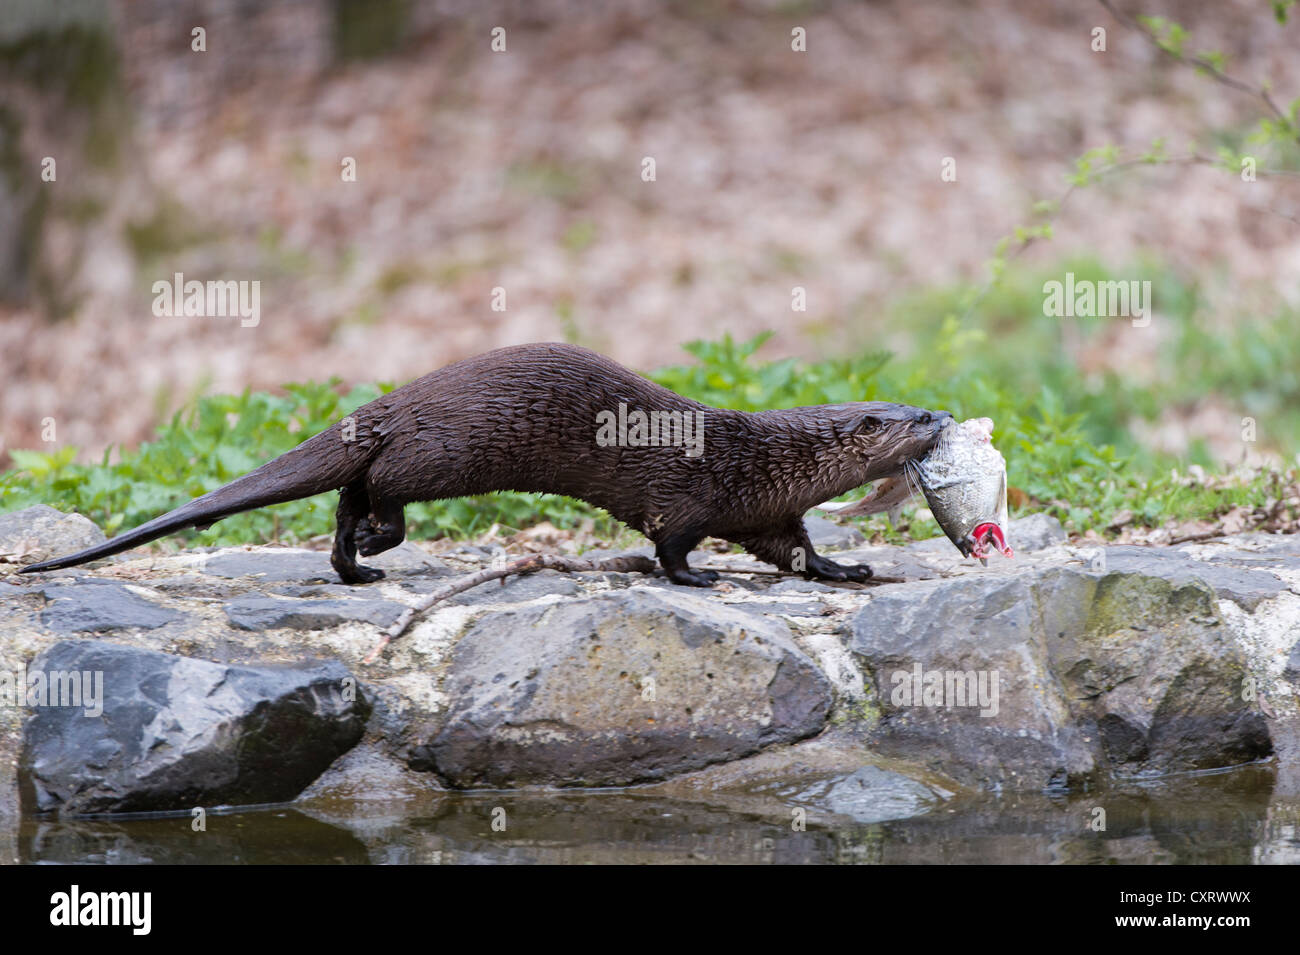 European otter (Lutra lutra), carrying a fish, Tierpark Edersee zoo, Kellerwald, Hesse Stock Photo